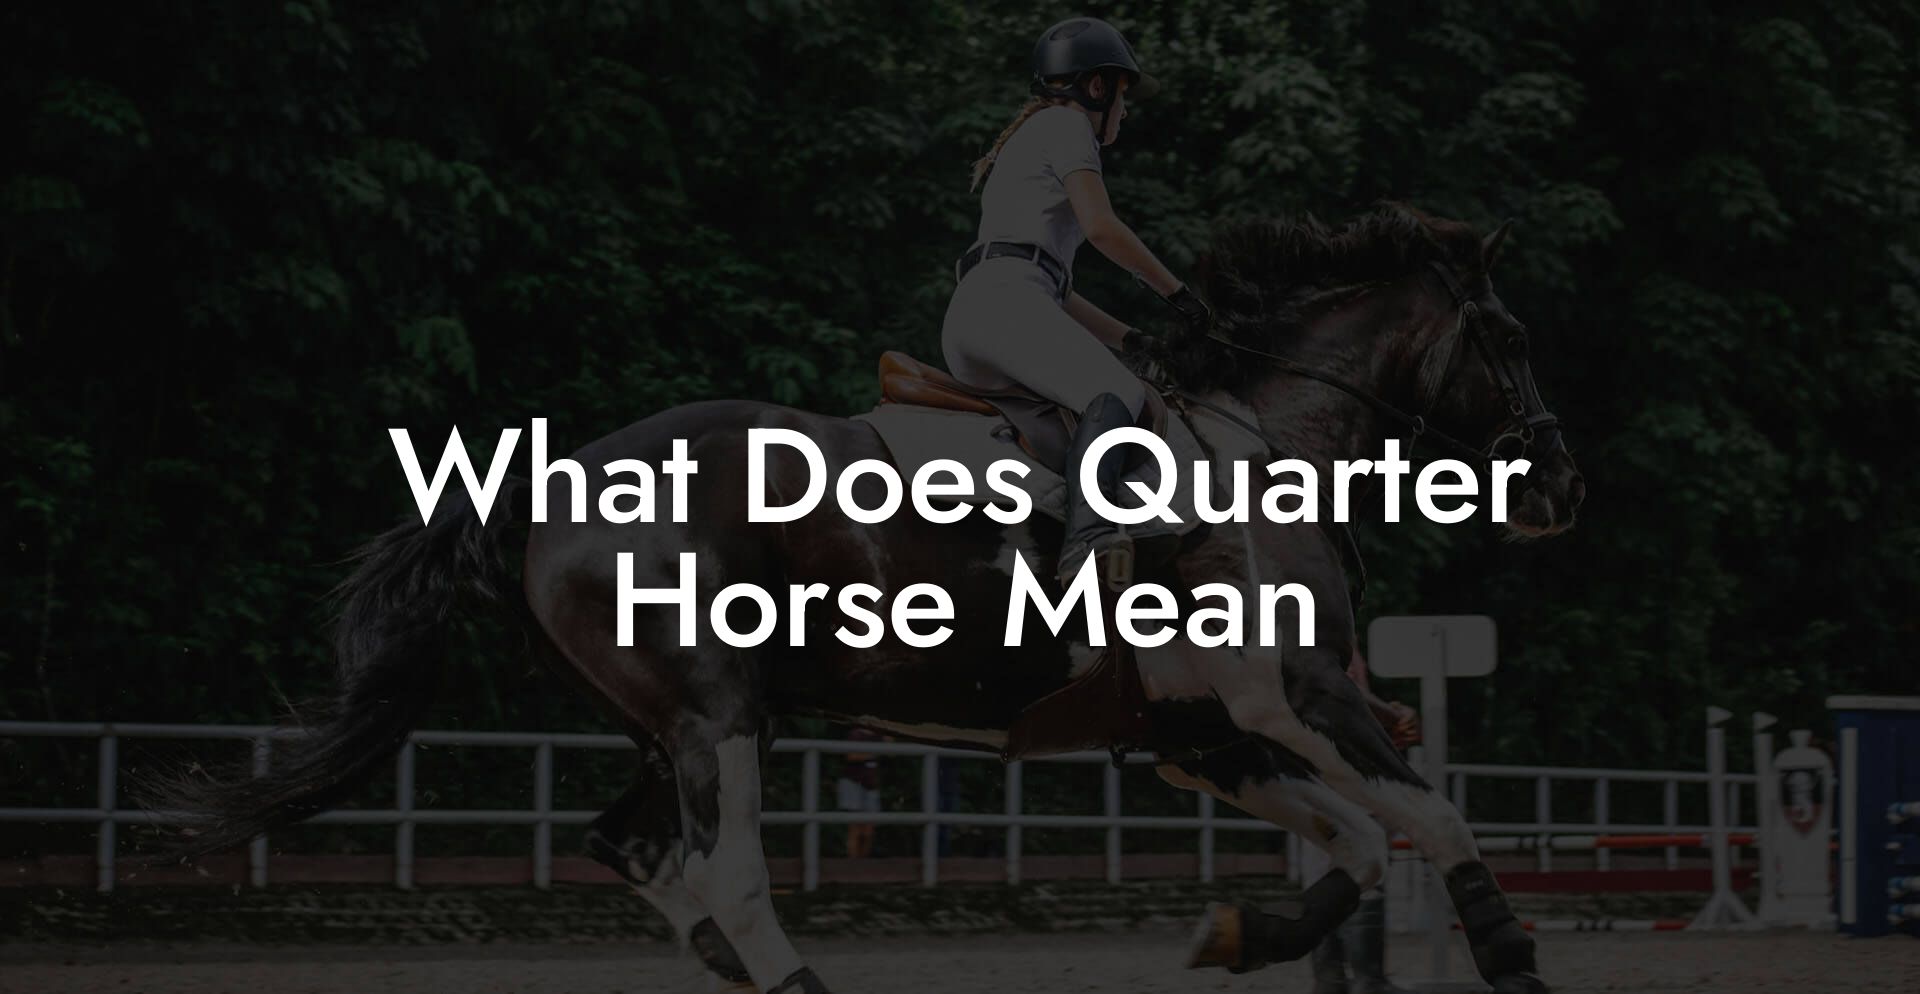 What Does Quarter Horse Mean